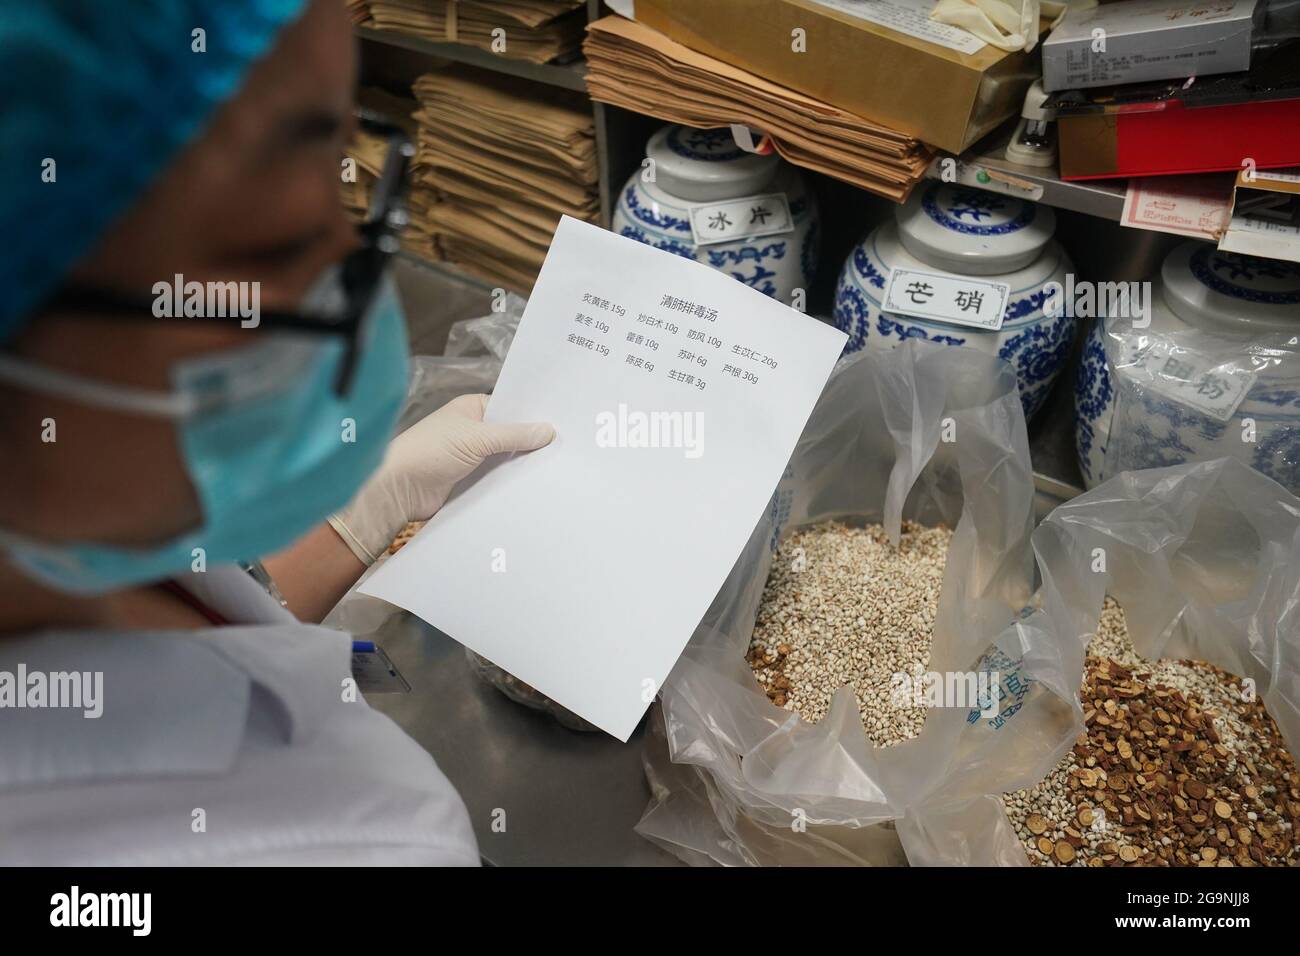 Nanjing, China's Jiangsu Province. 27th July, 2021. A pharmacist of Jiangning Chinese medical hospital prepares ingredients to produce traditional Chinese medicine (TCM) decoctions in Nanjing, capital of east China's Jiangsu Province, July 27, 2021. So far, the hospital has distributed over 15,000 doses of TCM decoctions to help control the recent spike in COVID-19 infections in Nanjing. Credit: Ji Chunpeng/Xinhua/Alamy Live News Stock Photo